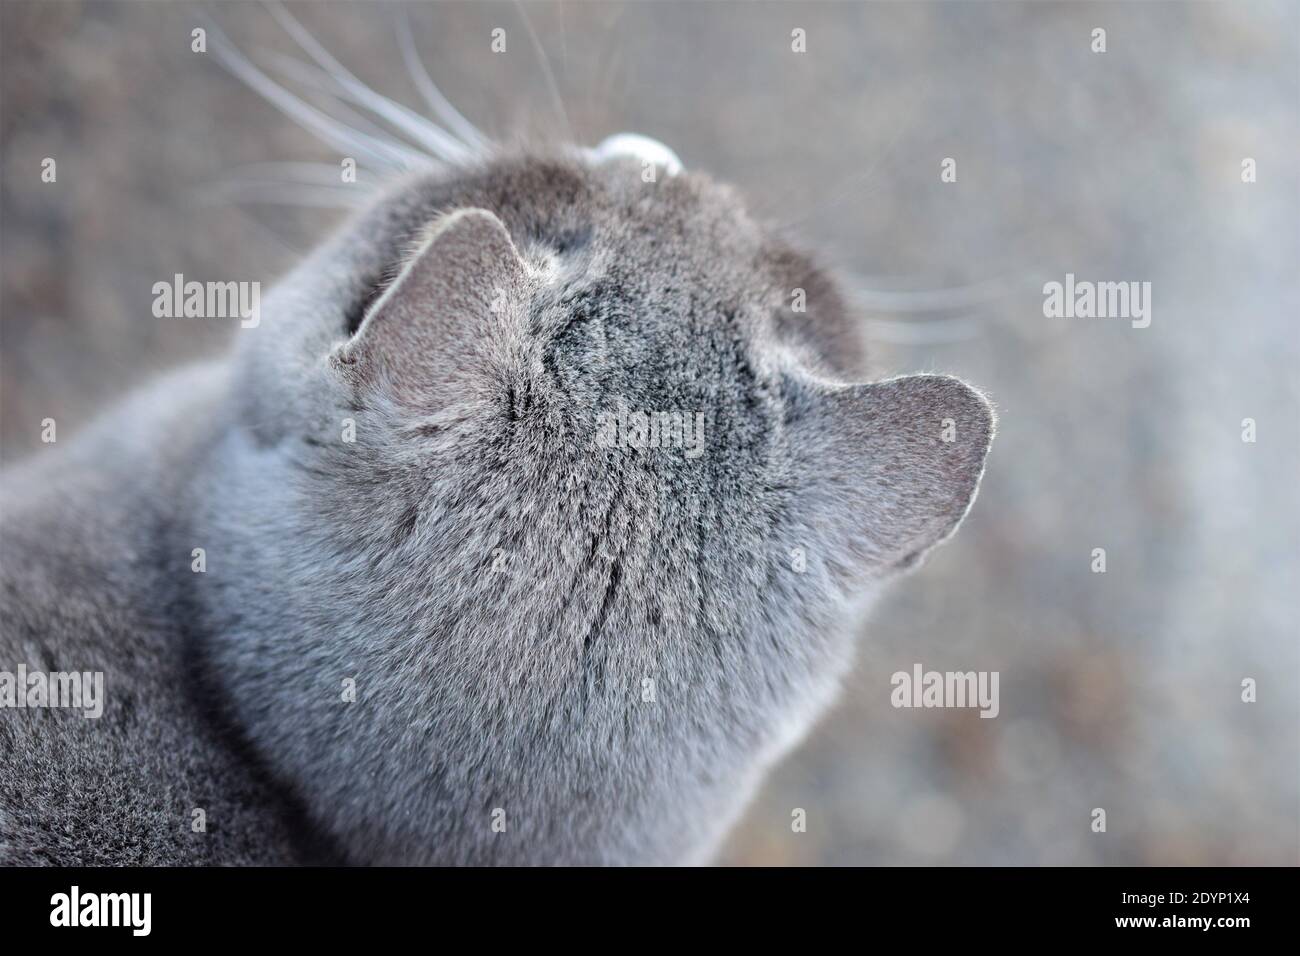 Top view of the head of a grey head against a grey background Stock Photo